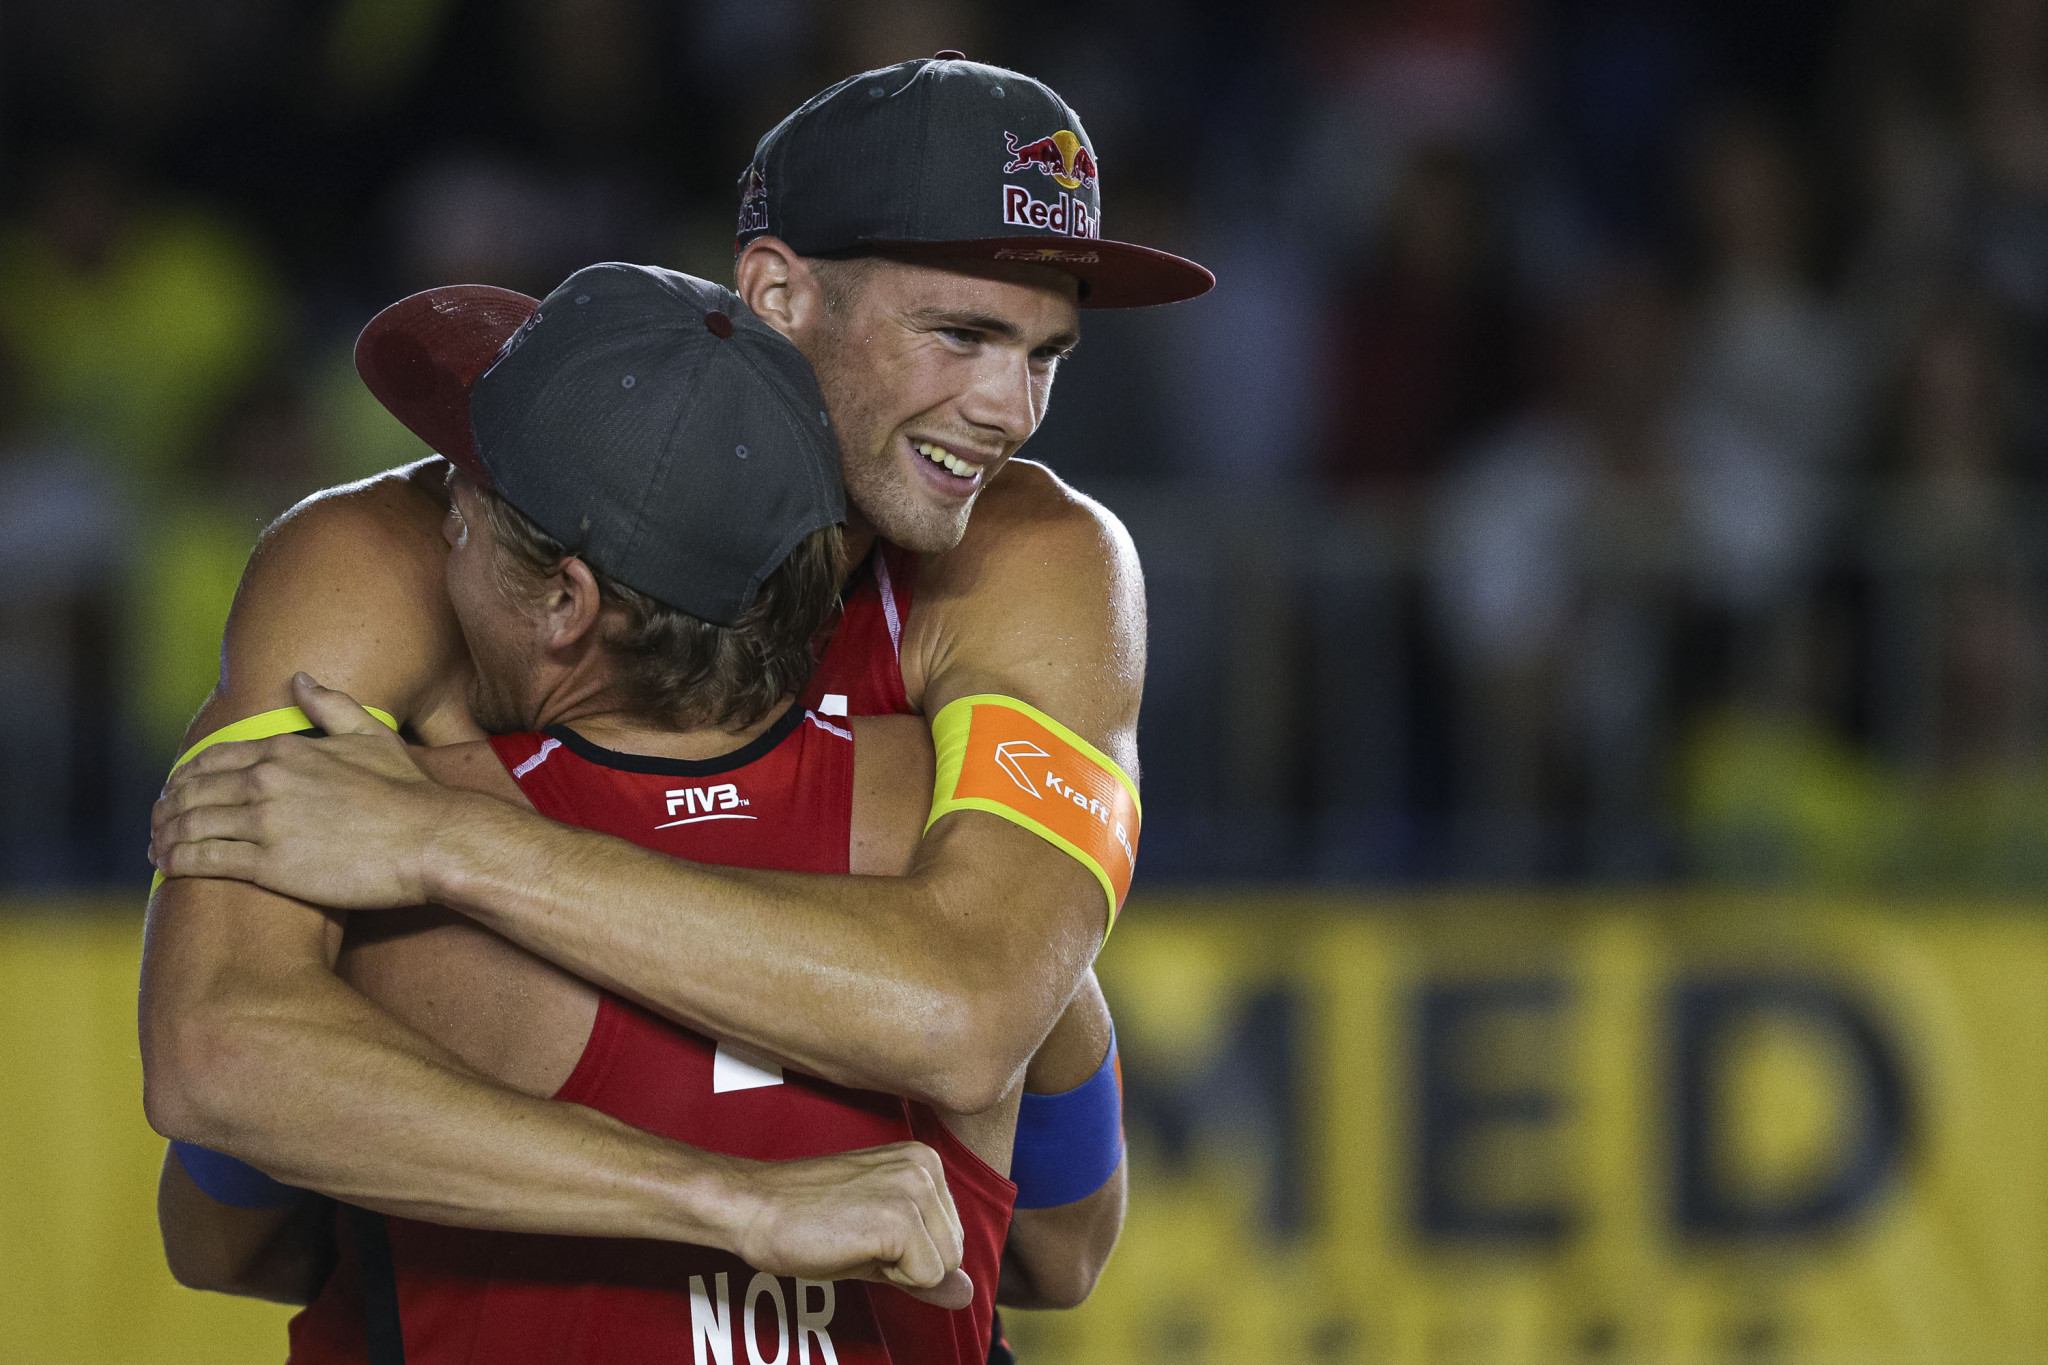 Impeccable pair Mol and Sørum fight back to take FIVB Beach Tour crown in Ostrava